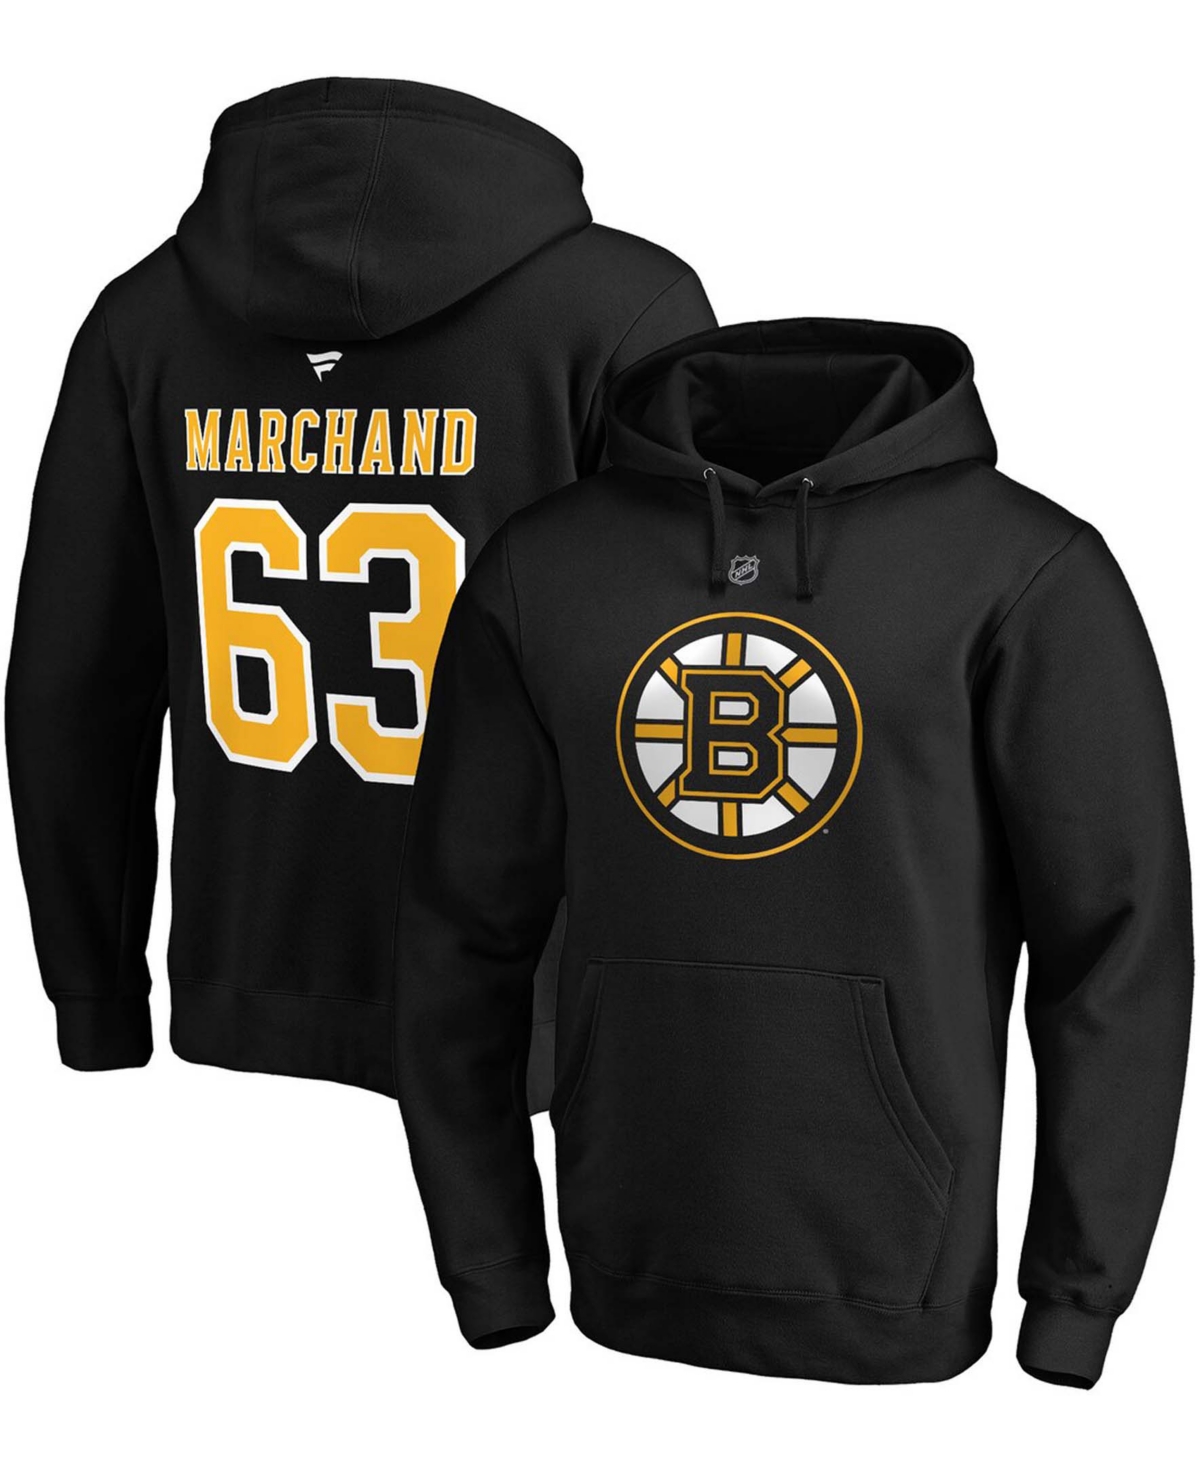 Men's Fanatics Branded Brad Marchand Black Boston Bruins Authentic Stack Name & Number Pullover Hoodie